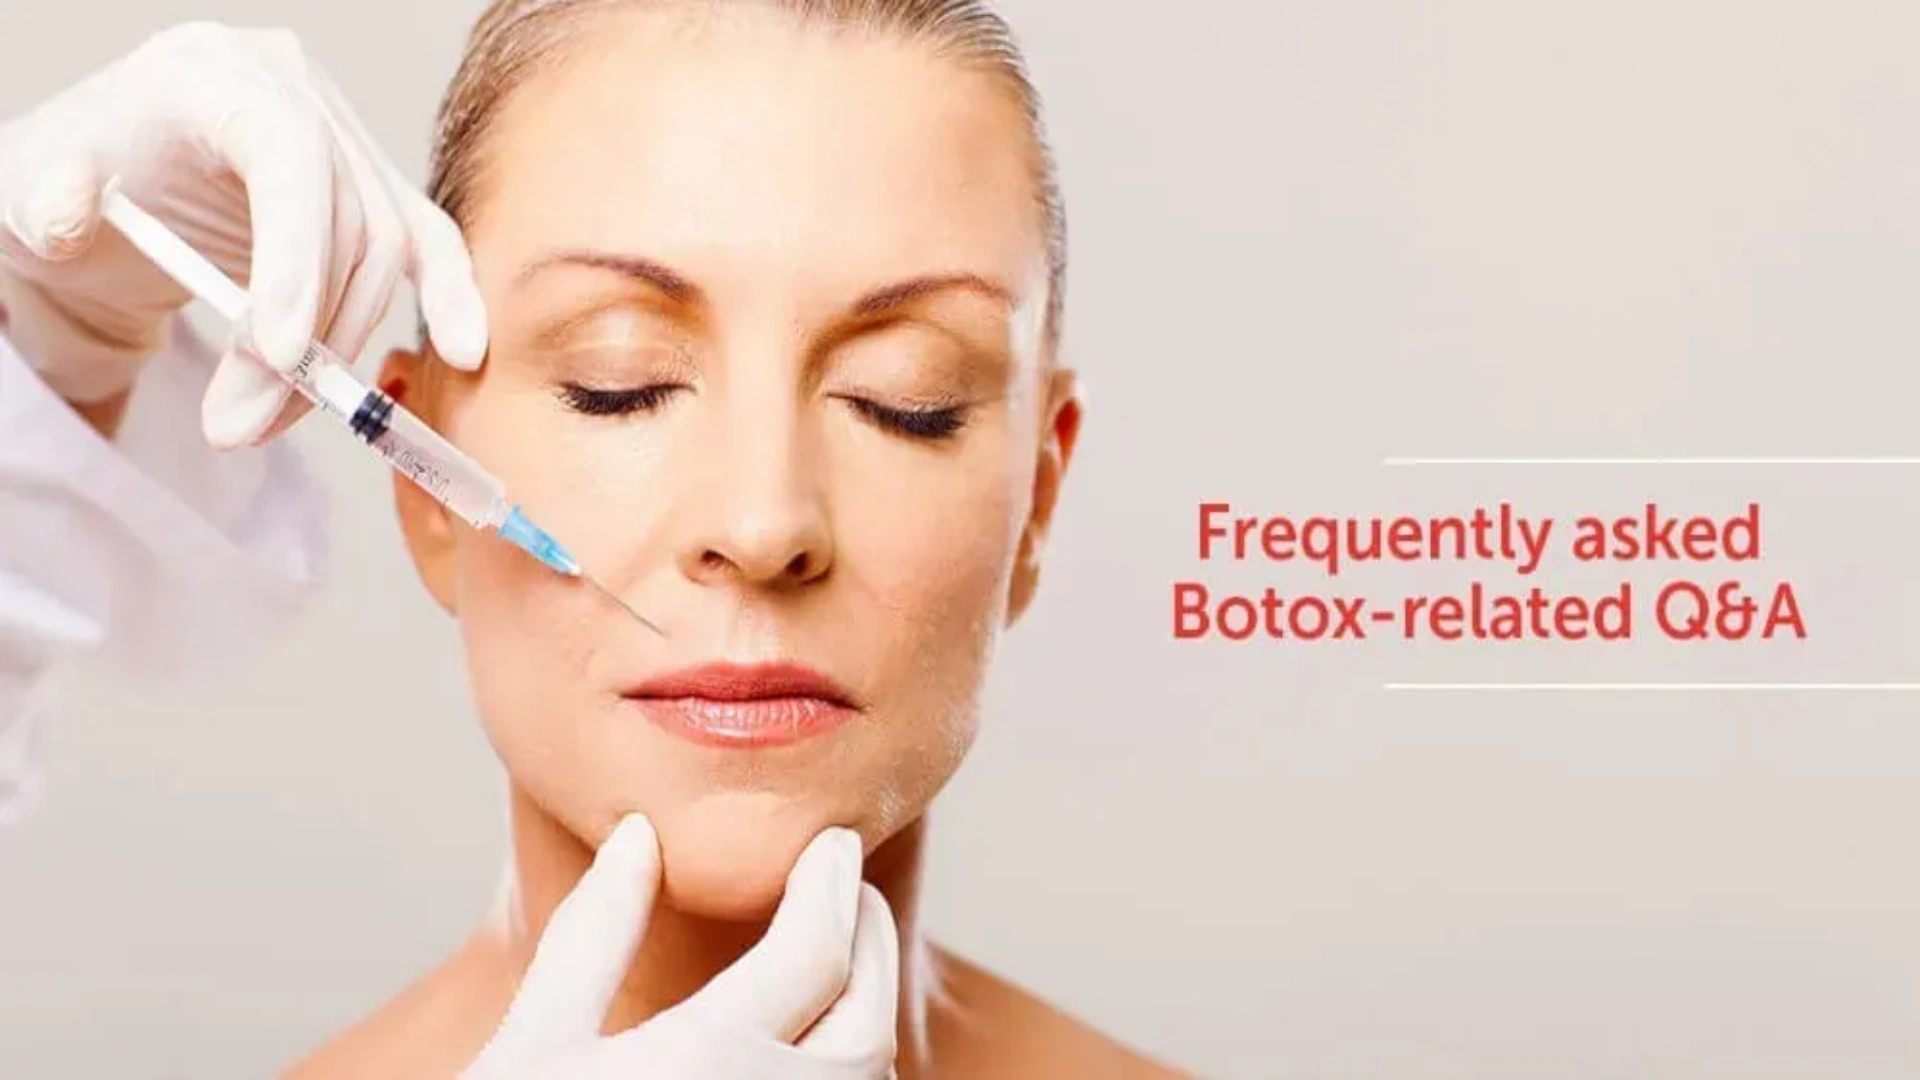 Unsure if botox treatment suits you? Read this guide covering considerations like your age, skin condition, goals, risks, costs and more to decide if botox is right for you now.